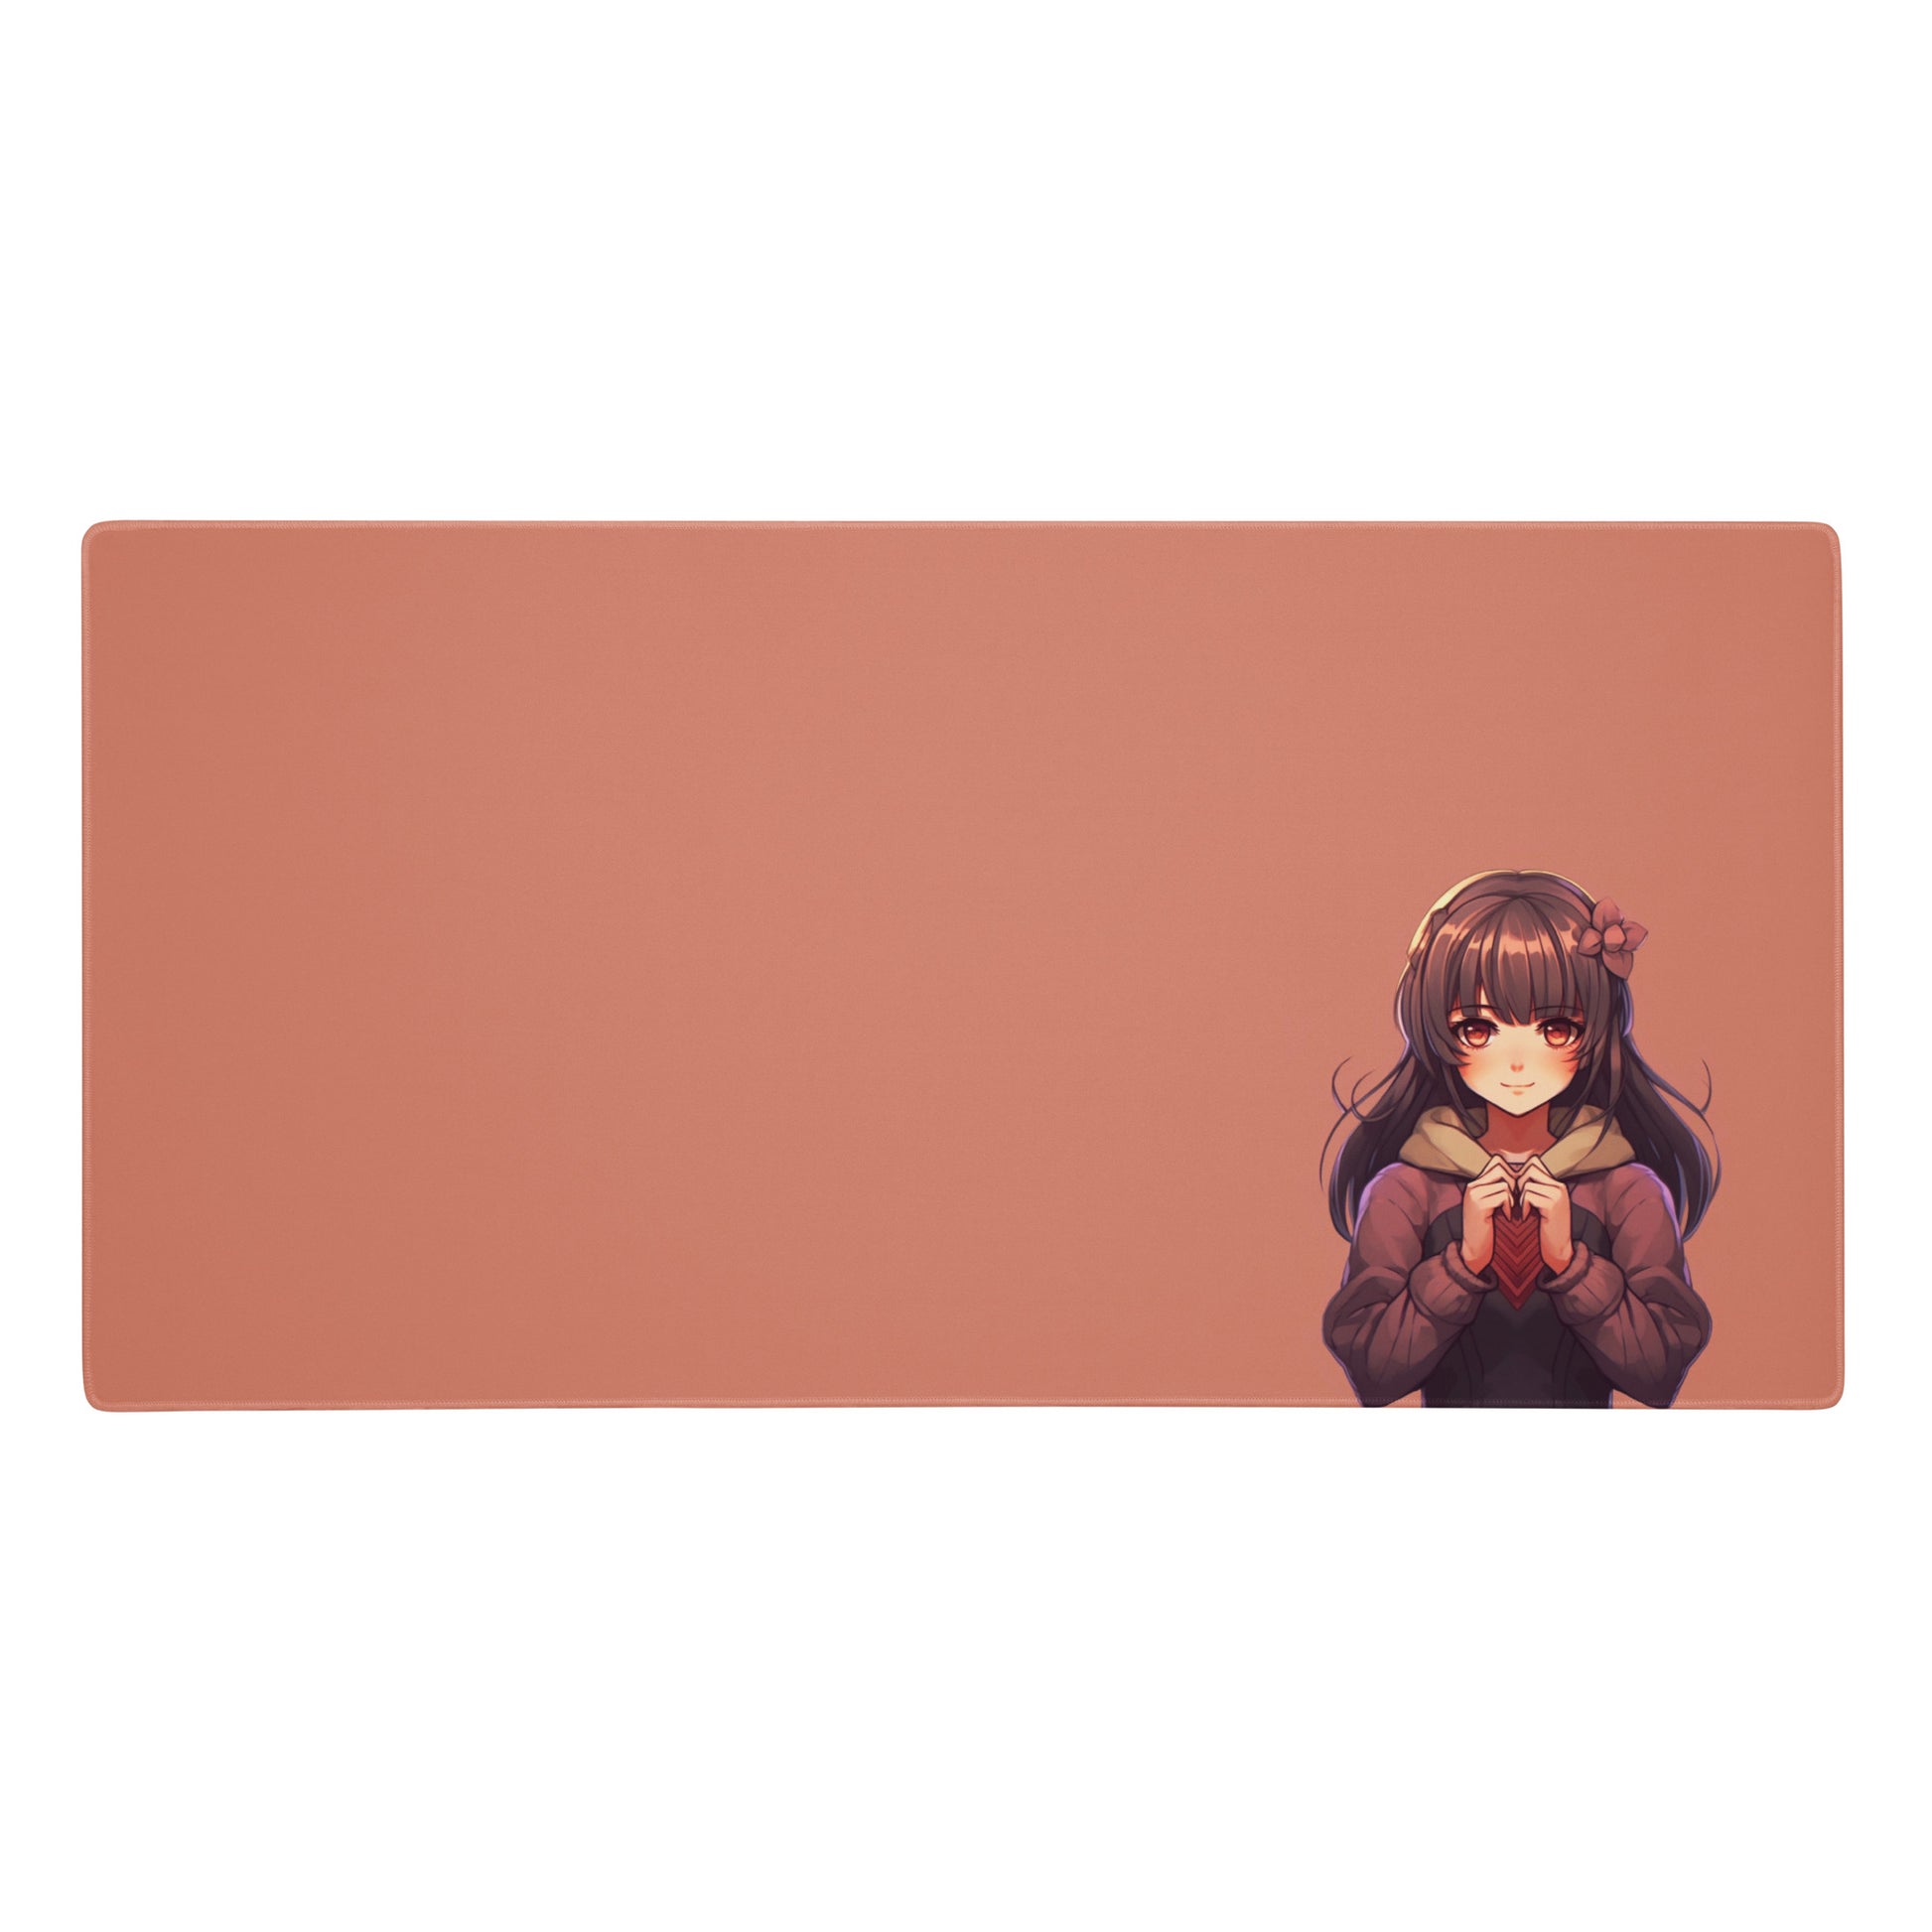 A 36" x 18" gaming desk pad with a blushing anime girl on a rose gold background.